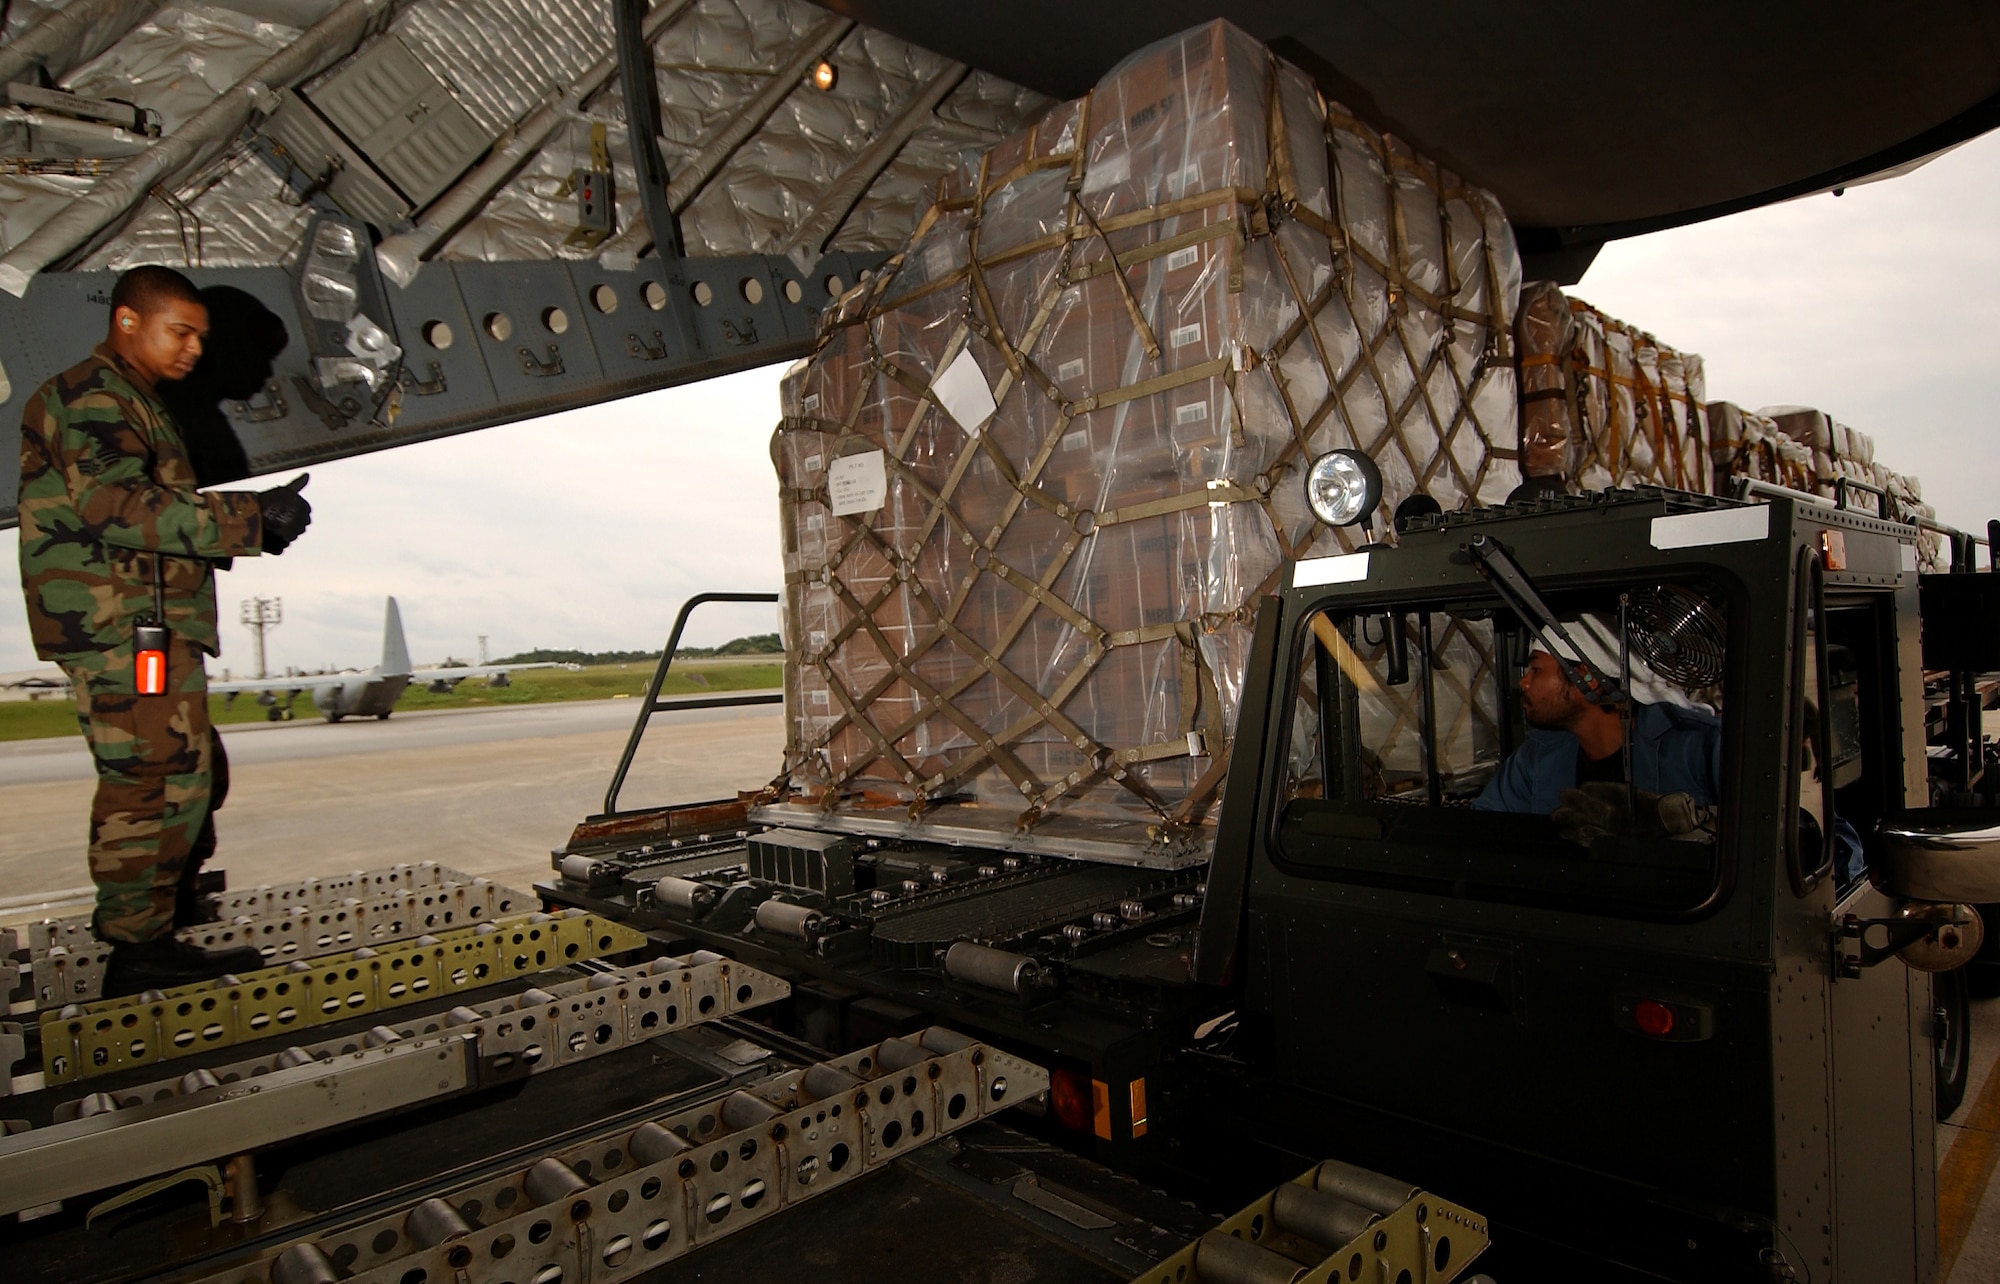 KADENA AIR BASE, Okinawa -- Senior Airman William Judge, 733rd Air Mobility Squadron air transportation specialist, guides cargo pallets onto a C-17 Globemaster III, Feb. 8. The 733rd AMS loaded medical supplies, food rations and cold weather gear onto this C-17 from Elmendorf Air Force Base, Alaska, and another from Hickam Air Force Base, Hawaii, bound for China.  Recently, 19 Chinese provinces experienced the most severe winter storms in 50 years, imposing severe hardships on millions of Chinese citizens.  U.S. Pacific Command coordinated the delivery of the humanitarian supplies to People’s Liberation Army at Shanghai International Airport, China.  (U.S. Air Force photo/Tech. Sgt. Rey Ramon)